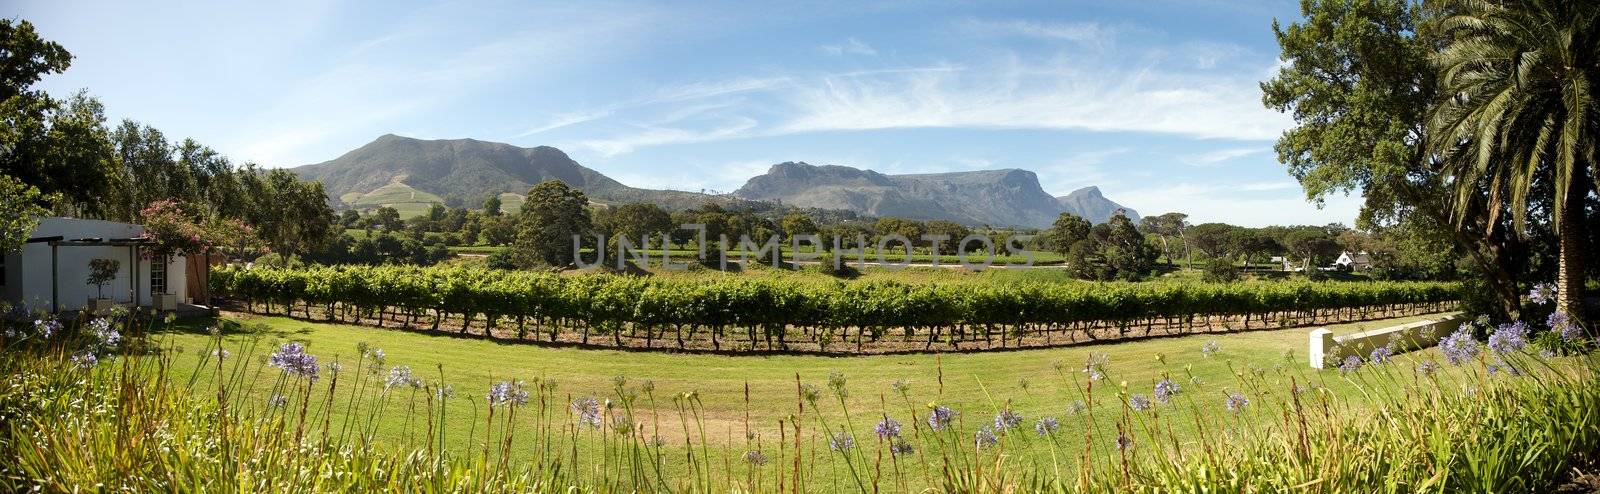 Wine estate in Cape Town by watchtheworld